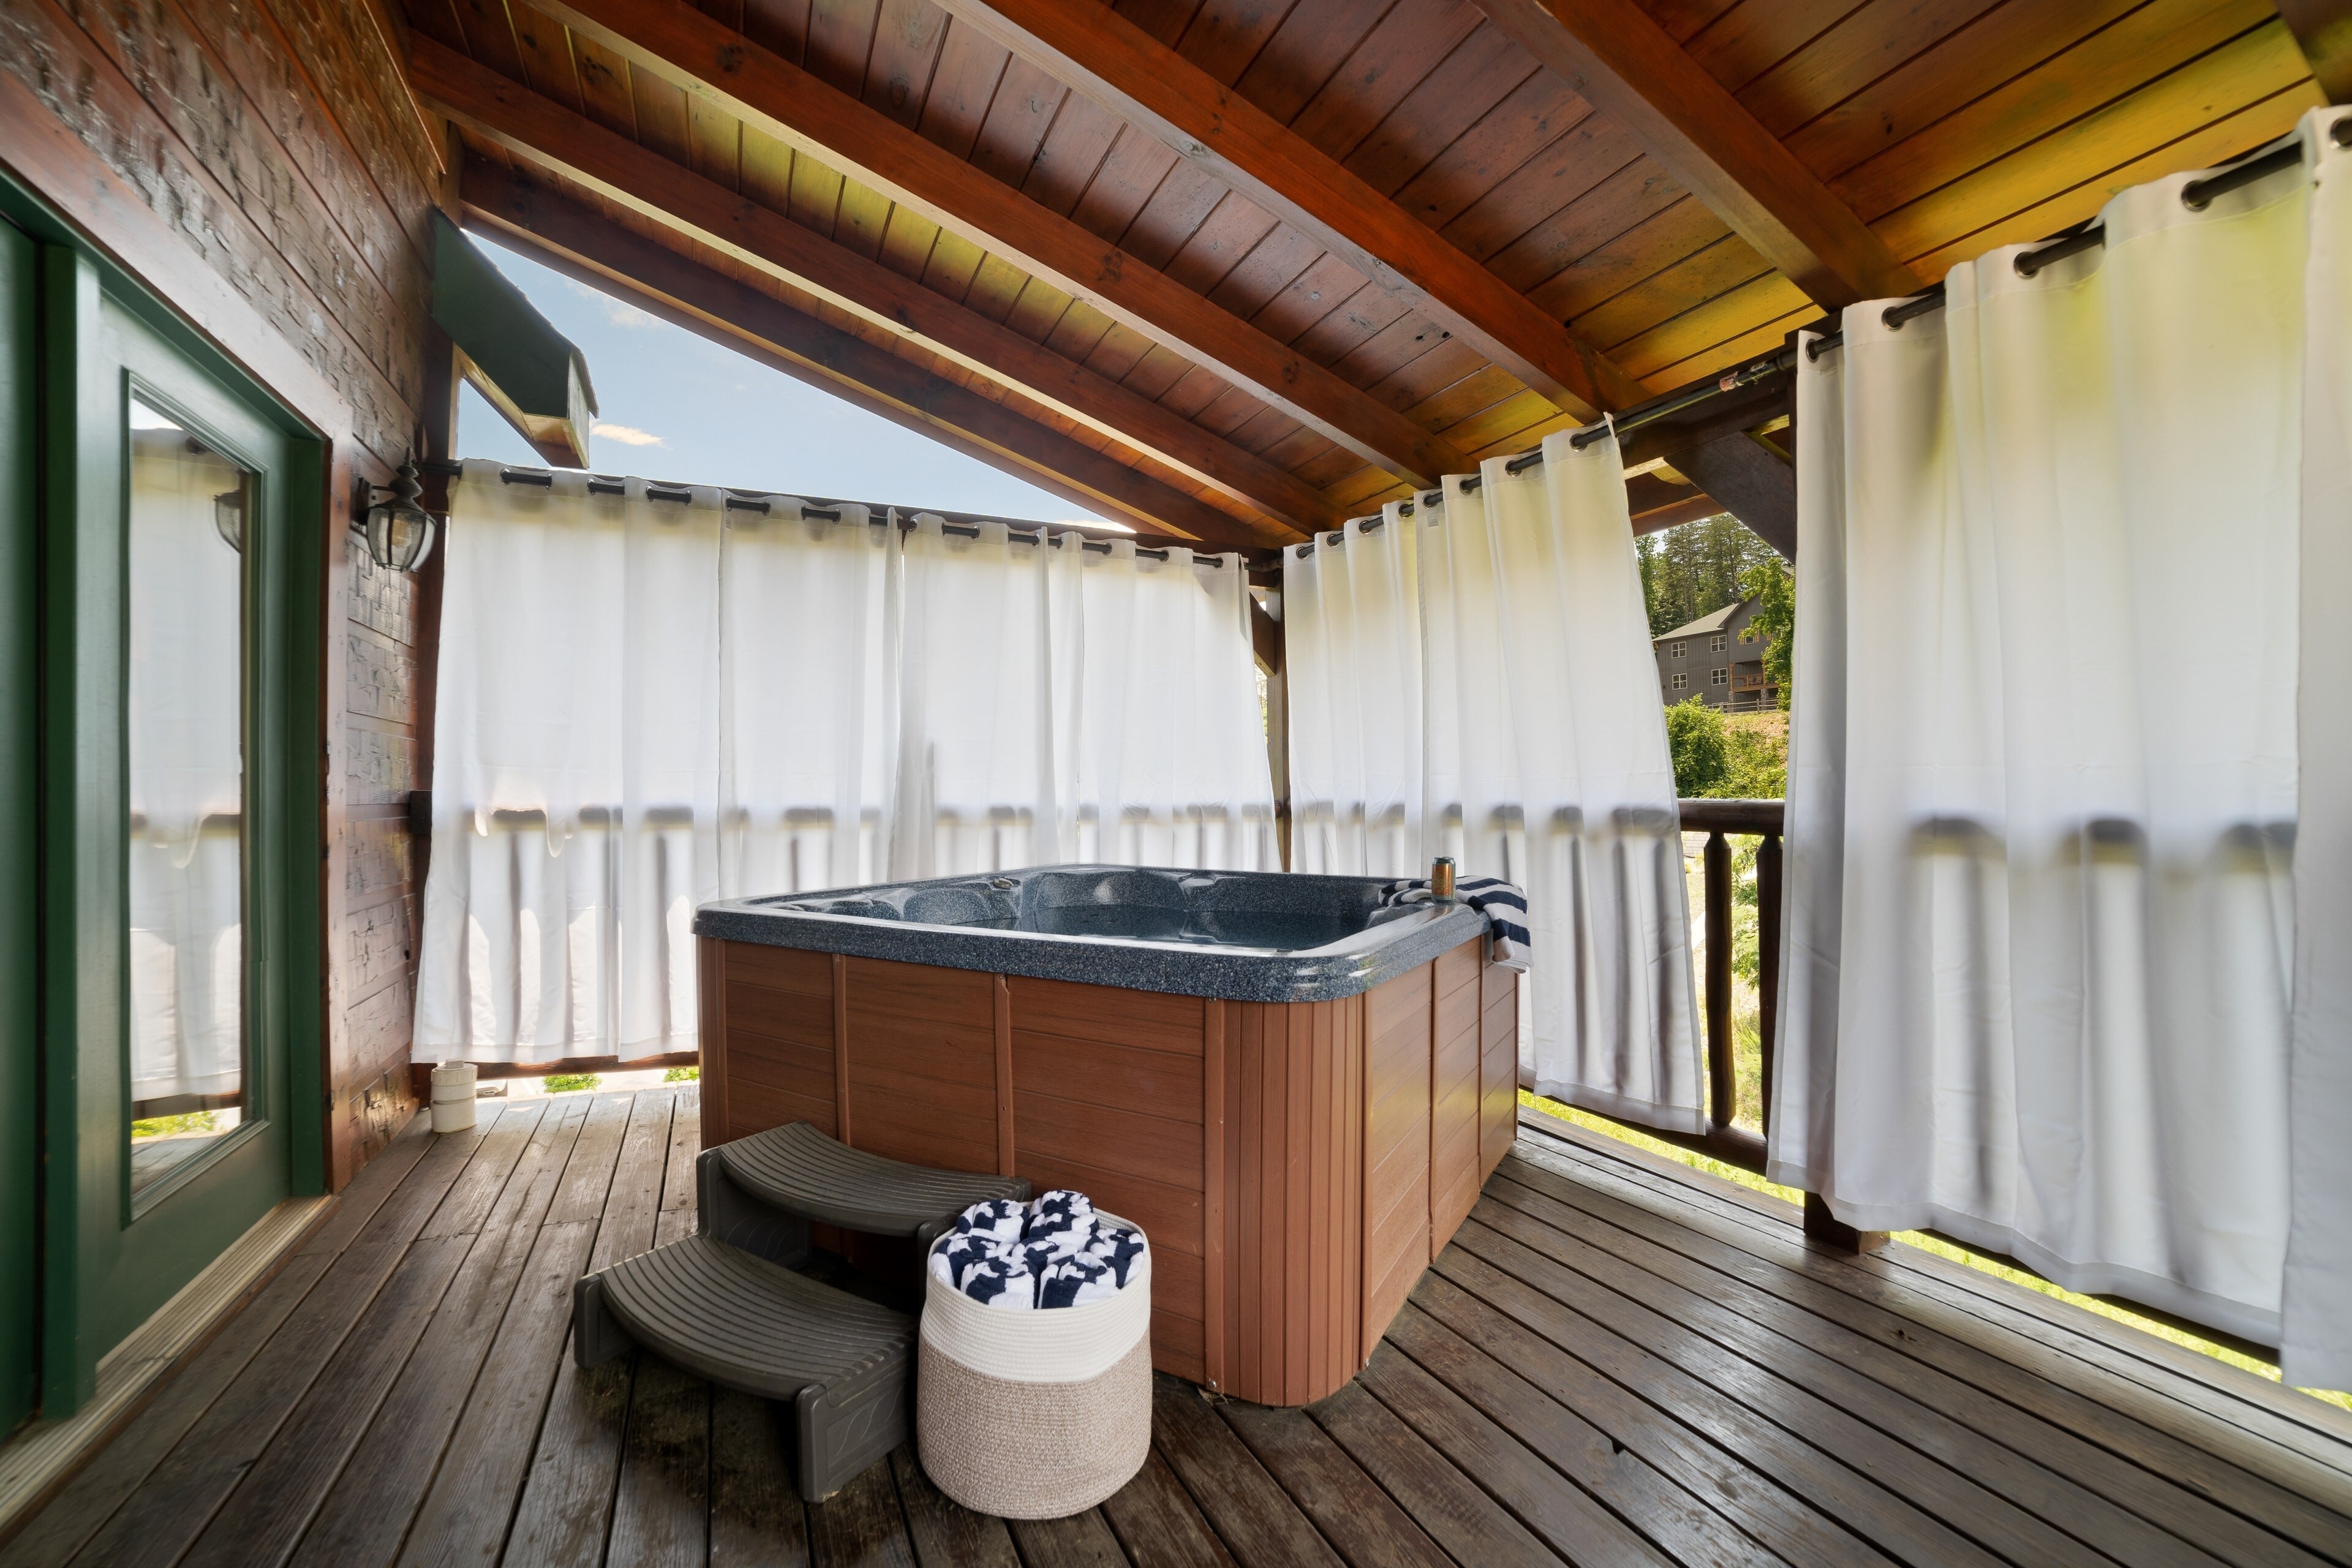 The hot tub can be accessed from the living room as well as from Bedroom 2.